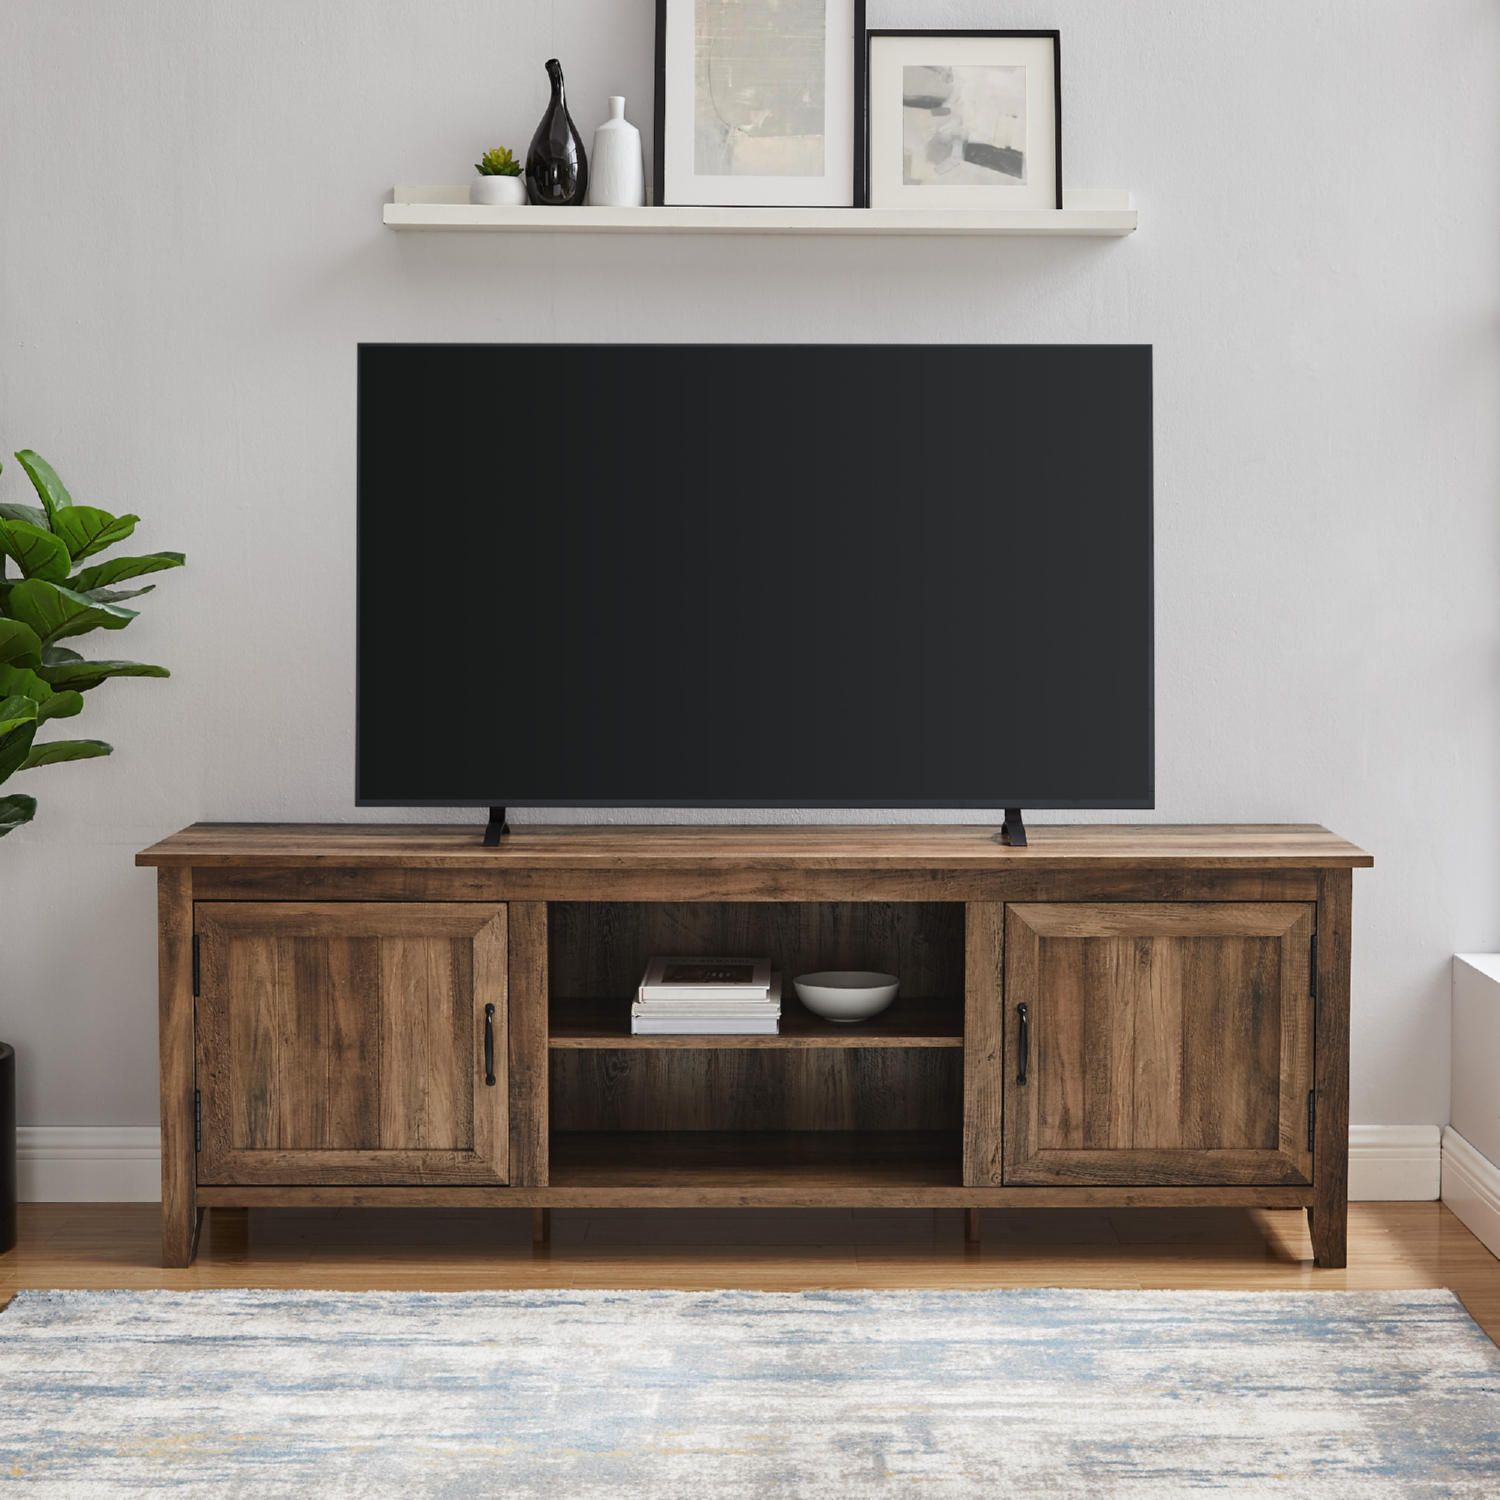 Walker Edison W70Cs2Dro 70" Modern Farmhouse Tv Stand In Rustic Oak Finish With Regard To Modern Farmhouse Rustic Tv Stands (View 10 of 15)